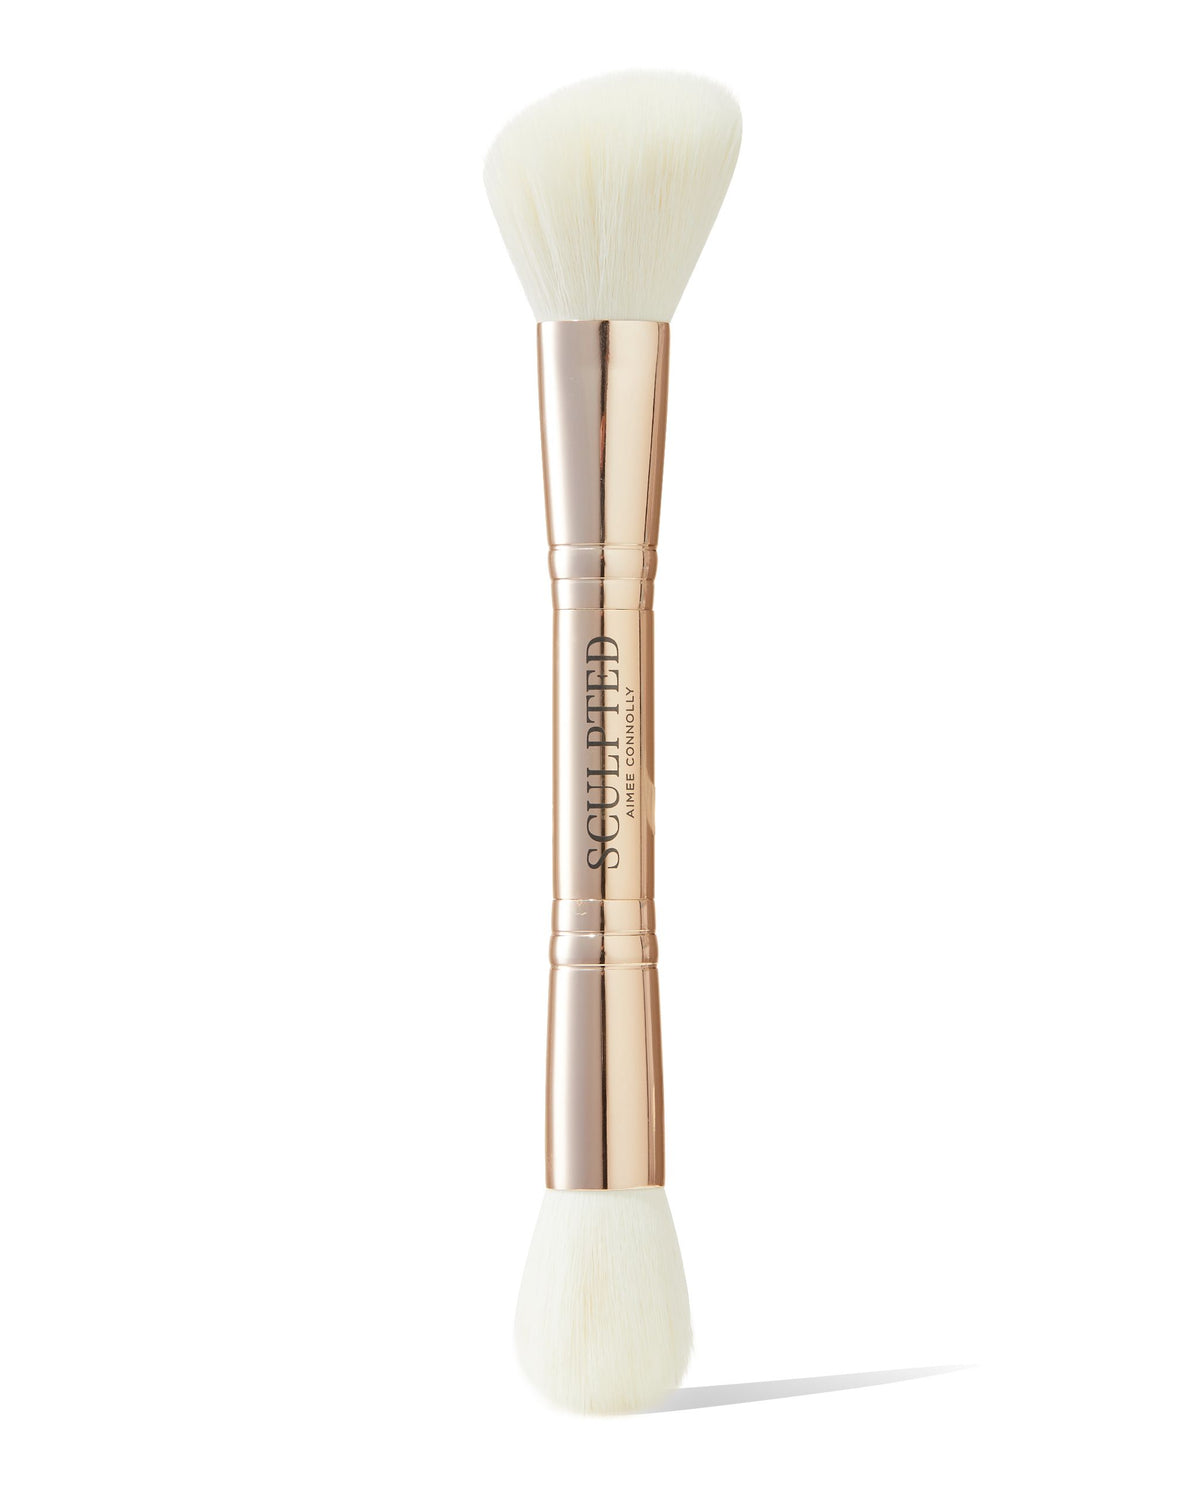 Sculpted by Aimee Connolly Blush & Powder Duo Brush